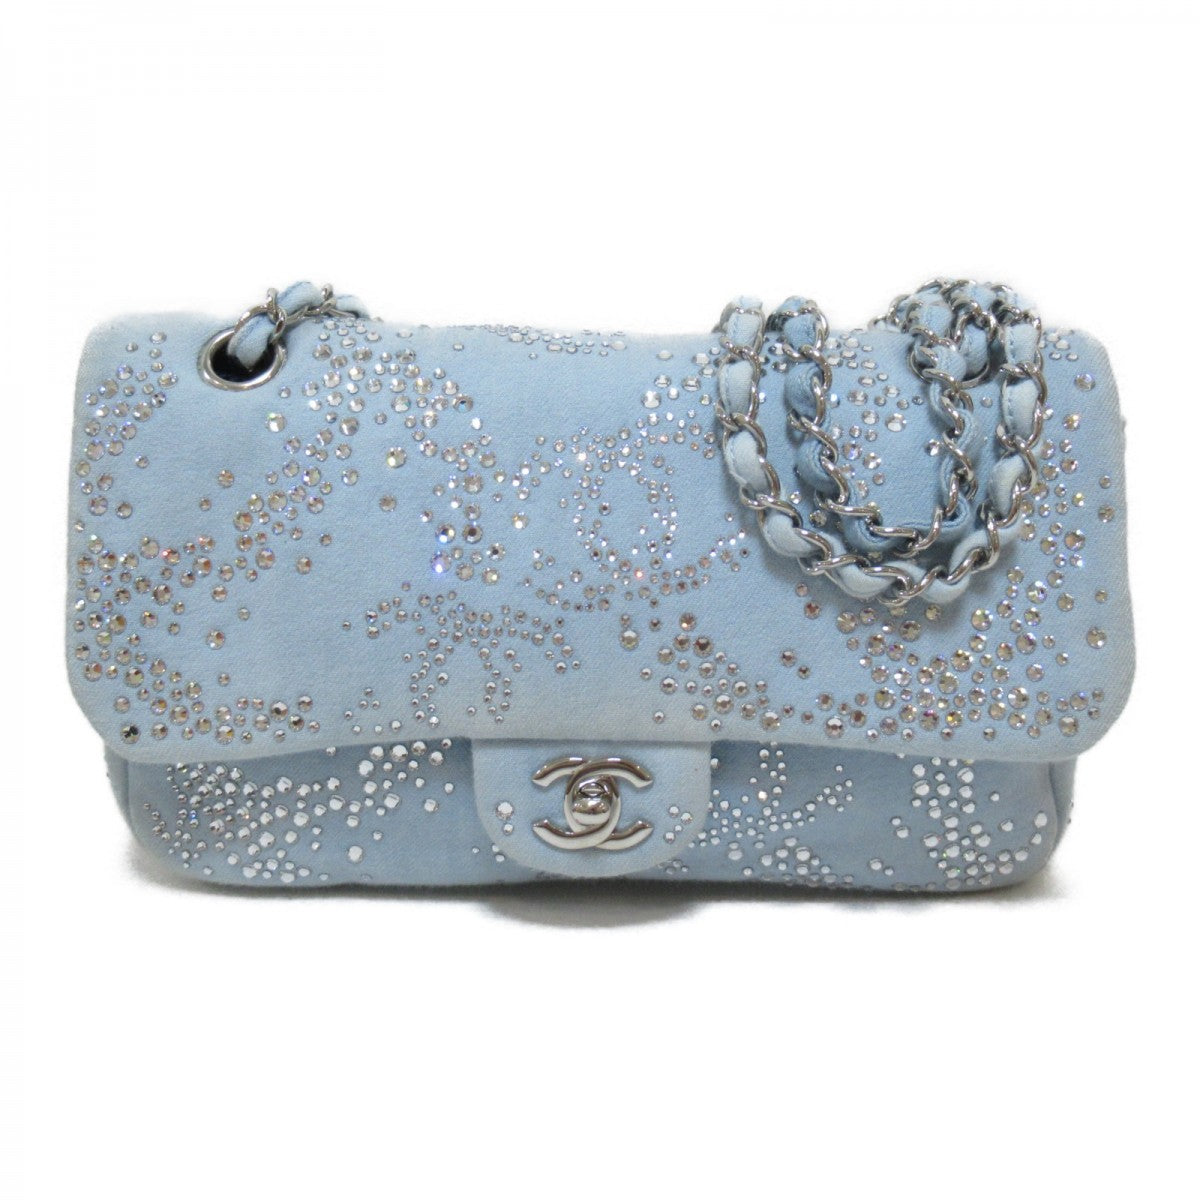 Denim and Crystal Embroidered Flap Bag